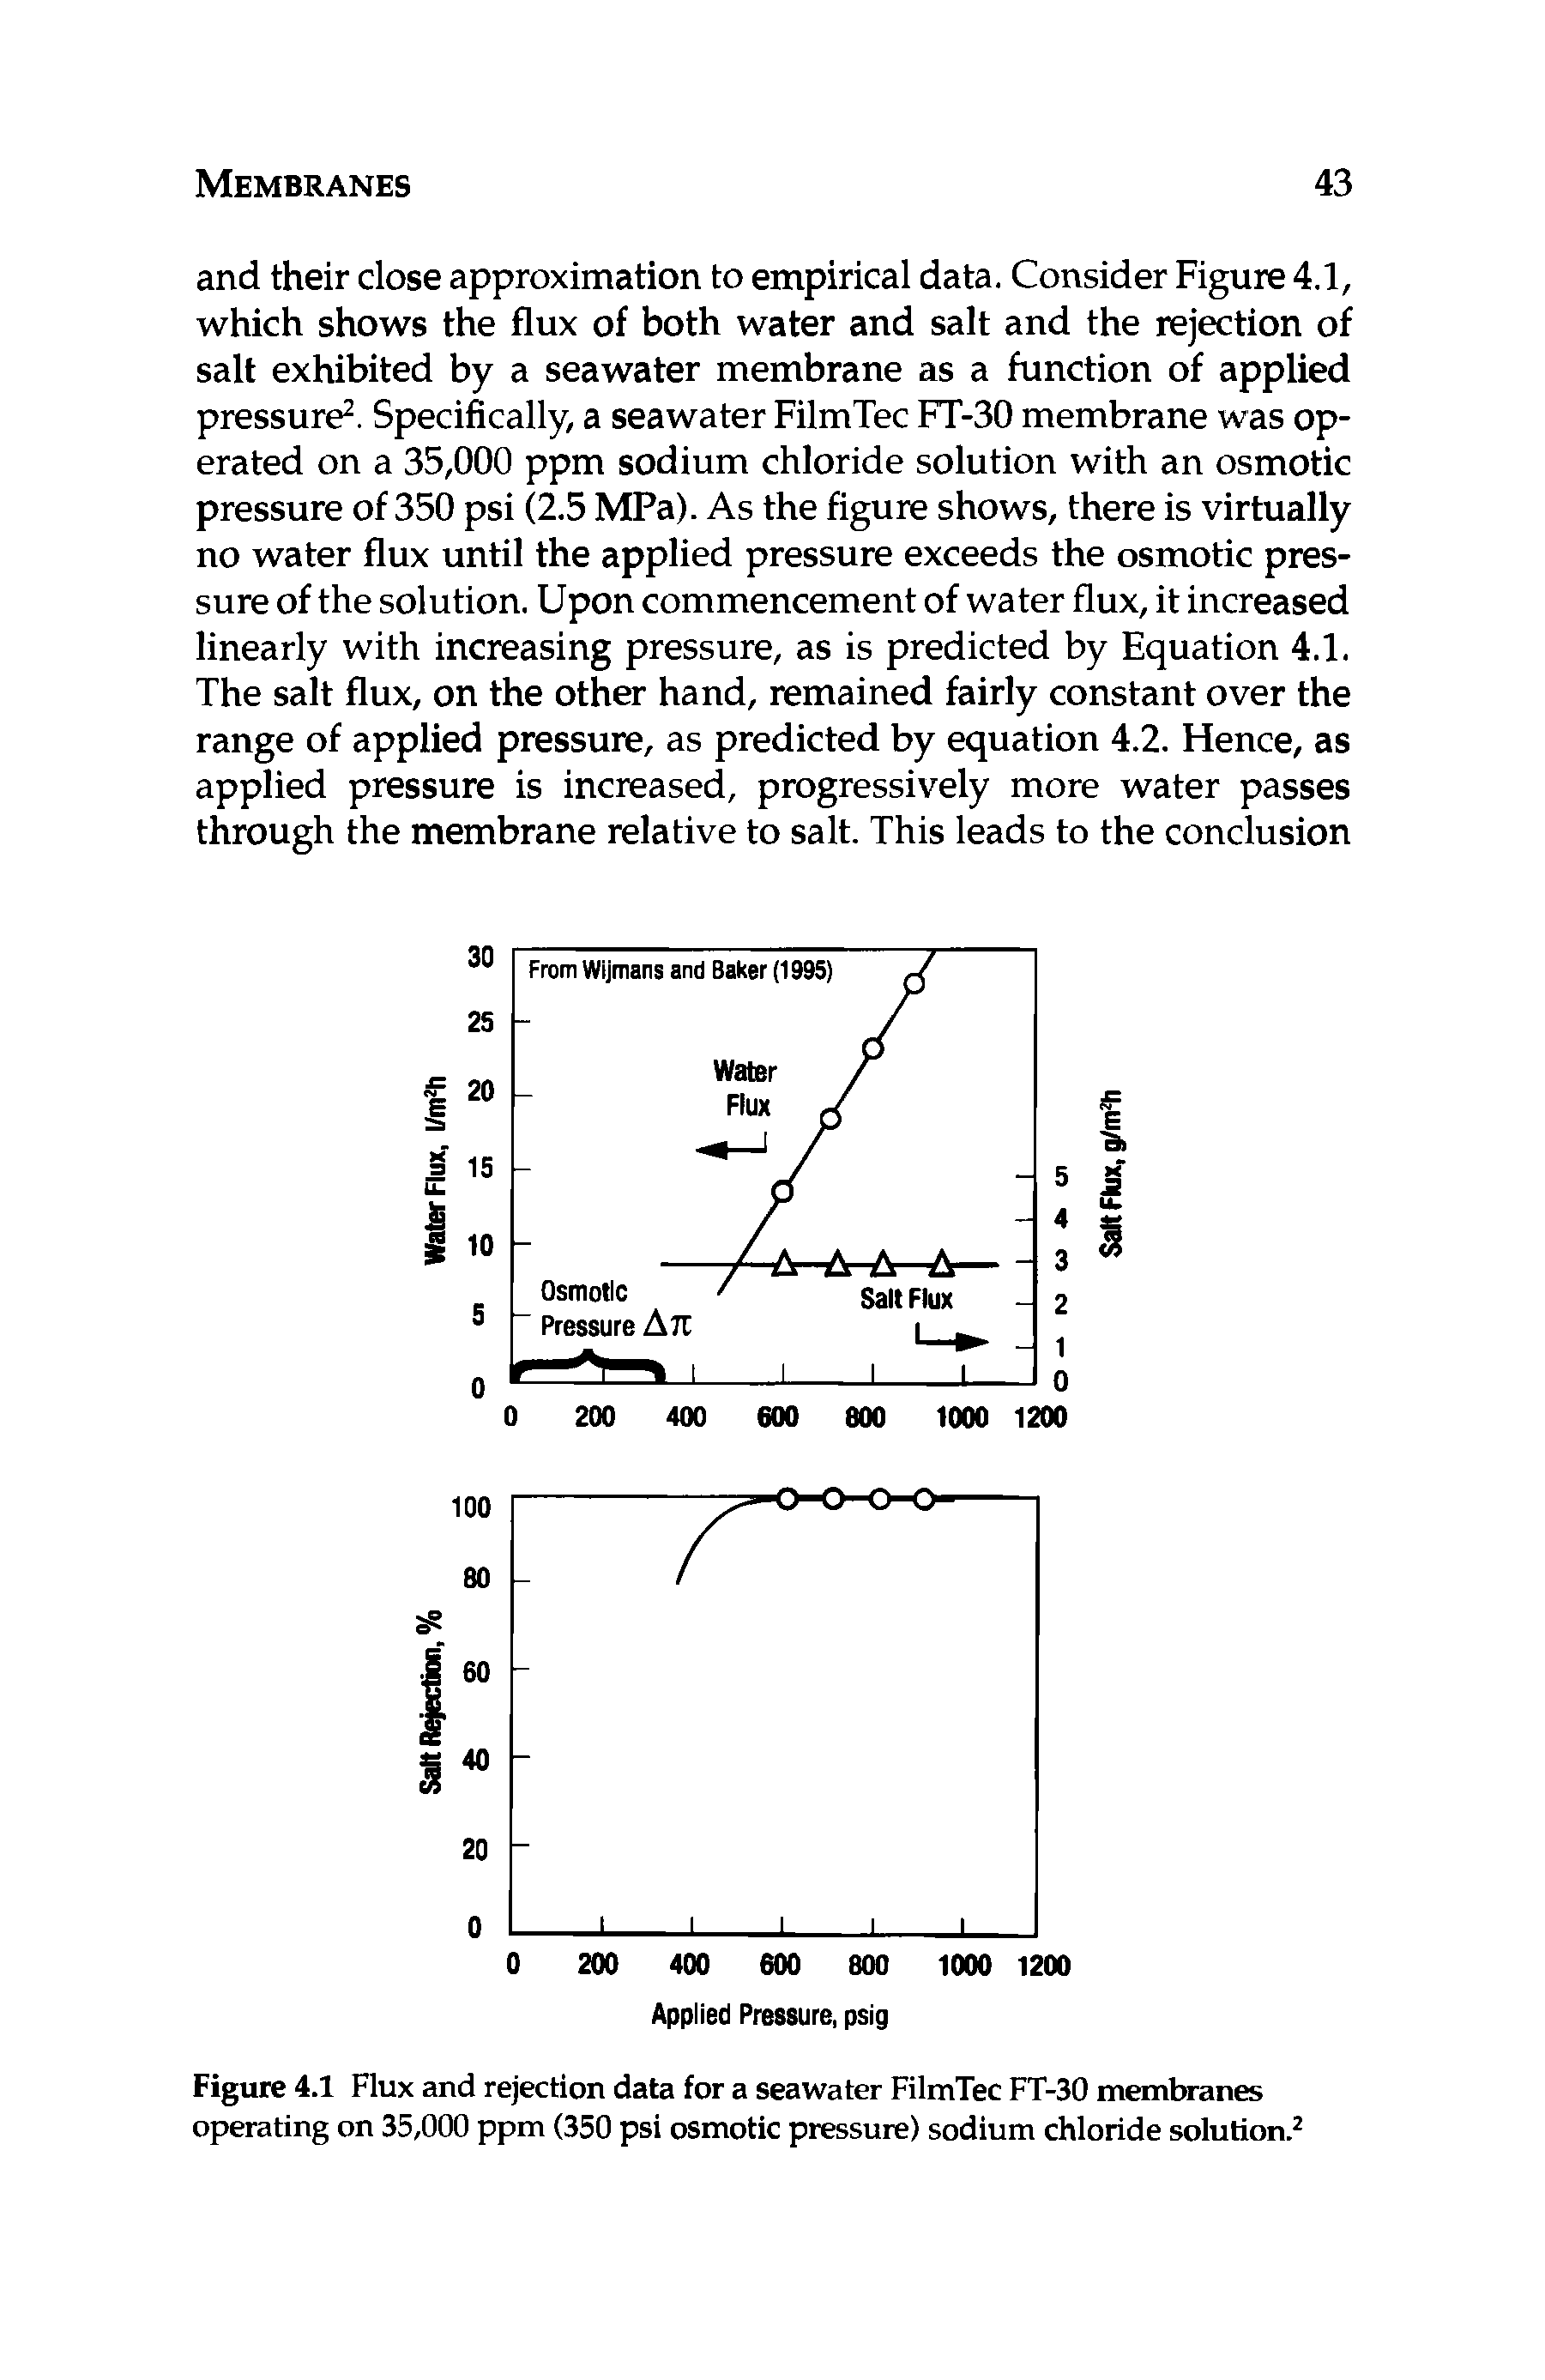 Figure 4.1 Flux and rejection data for a seawater FilmTec FT-30 membranes operating on 35,000 ppm (350 psi osmotic pressure) sodium chloride solution.2...